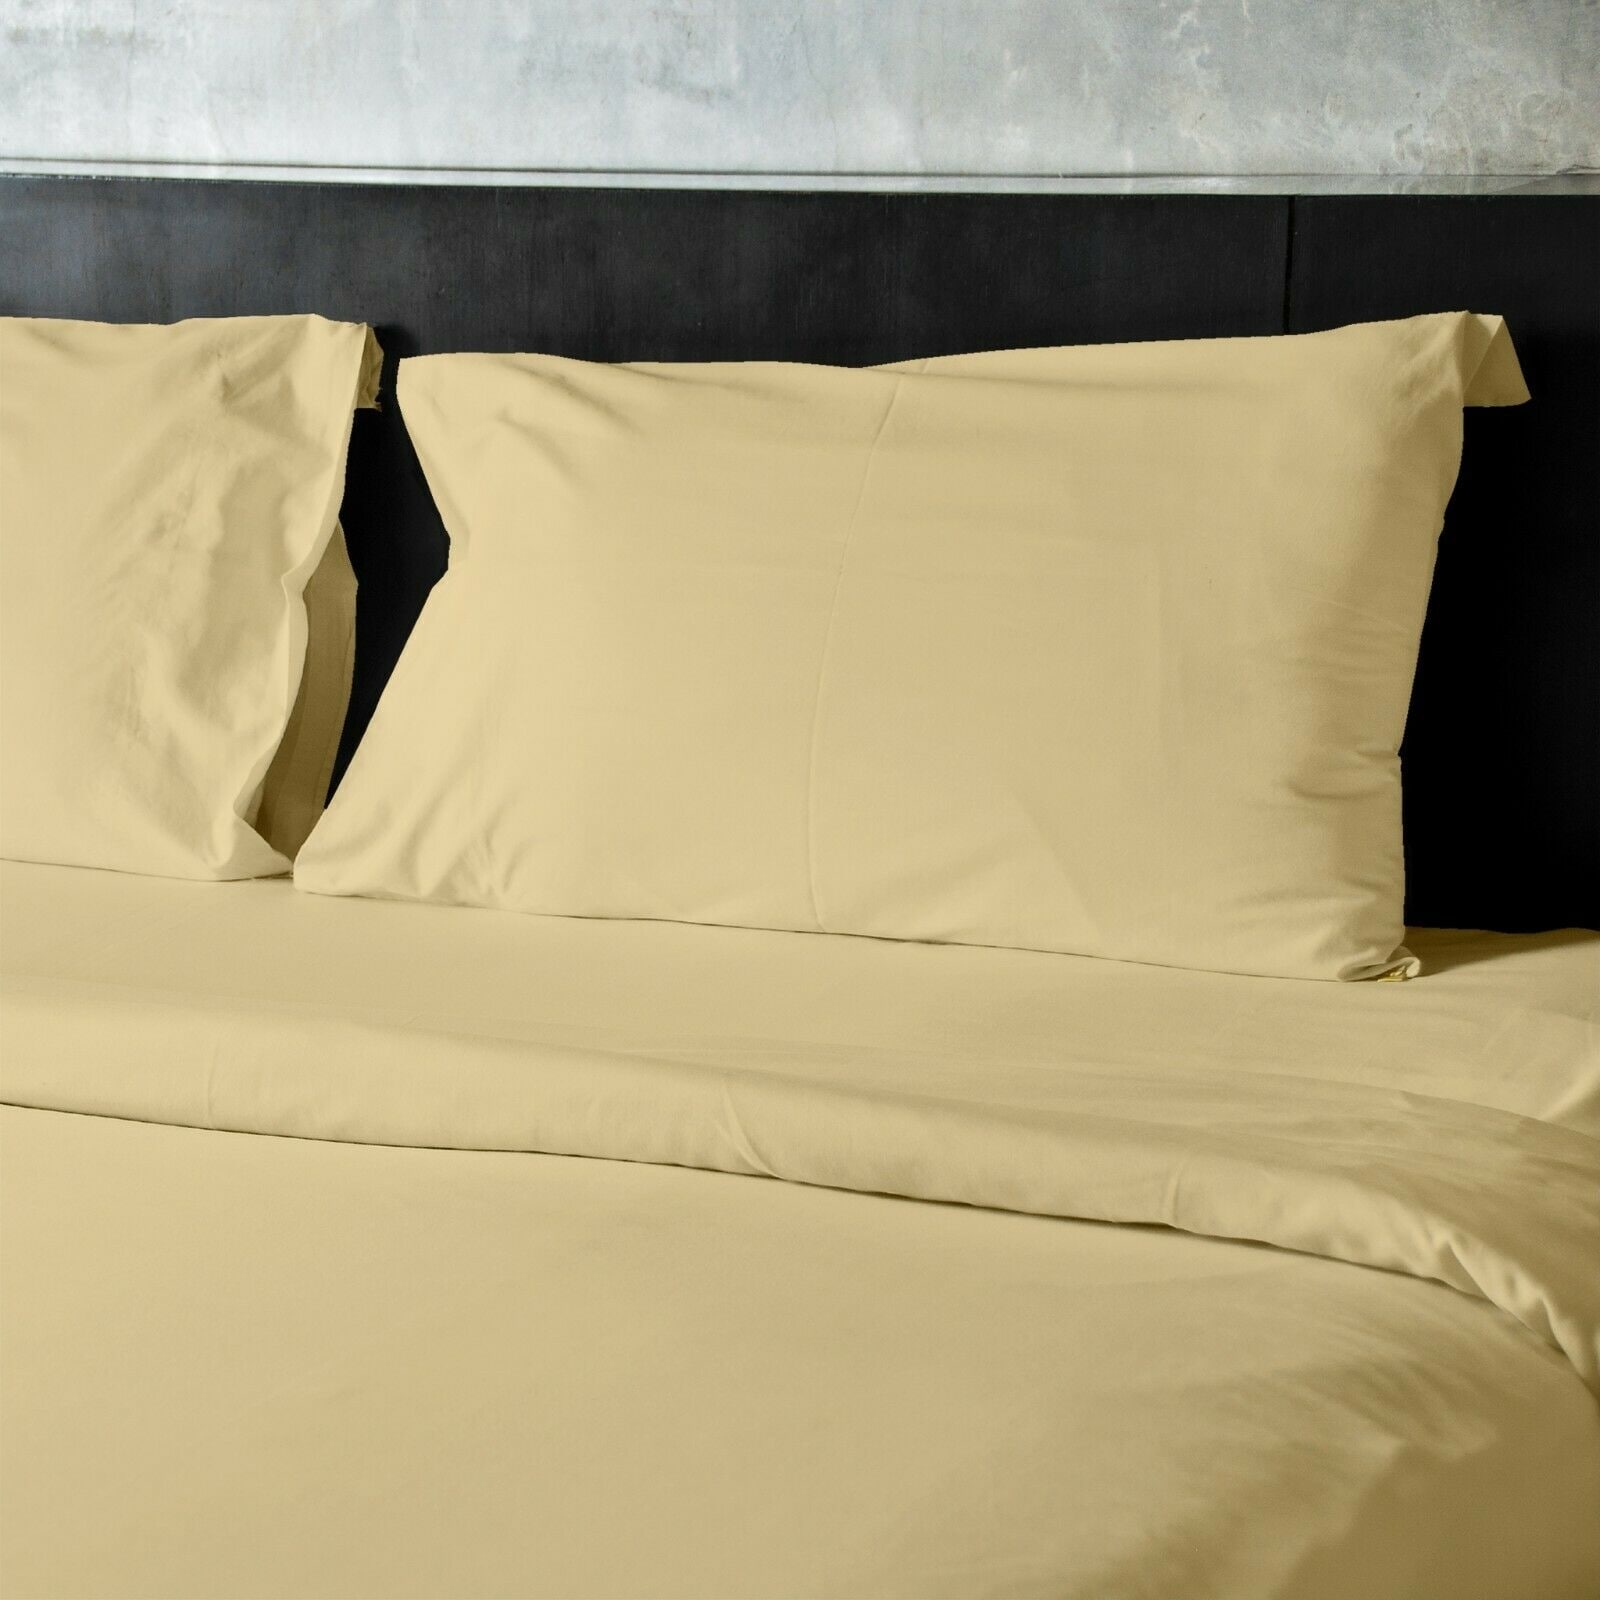 Cool Egyptian Cotton Feel Hotel Bed Sheets 4 Piece Set Bamboo Soft Deep Pockets 